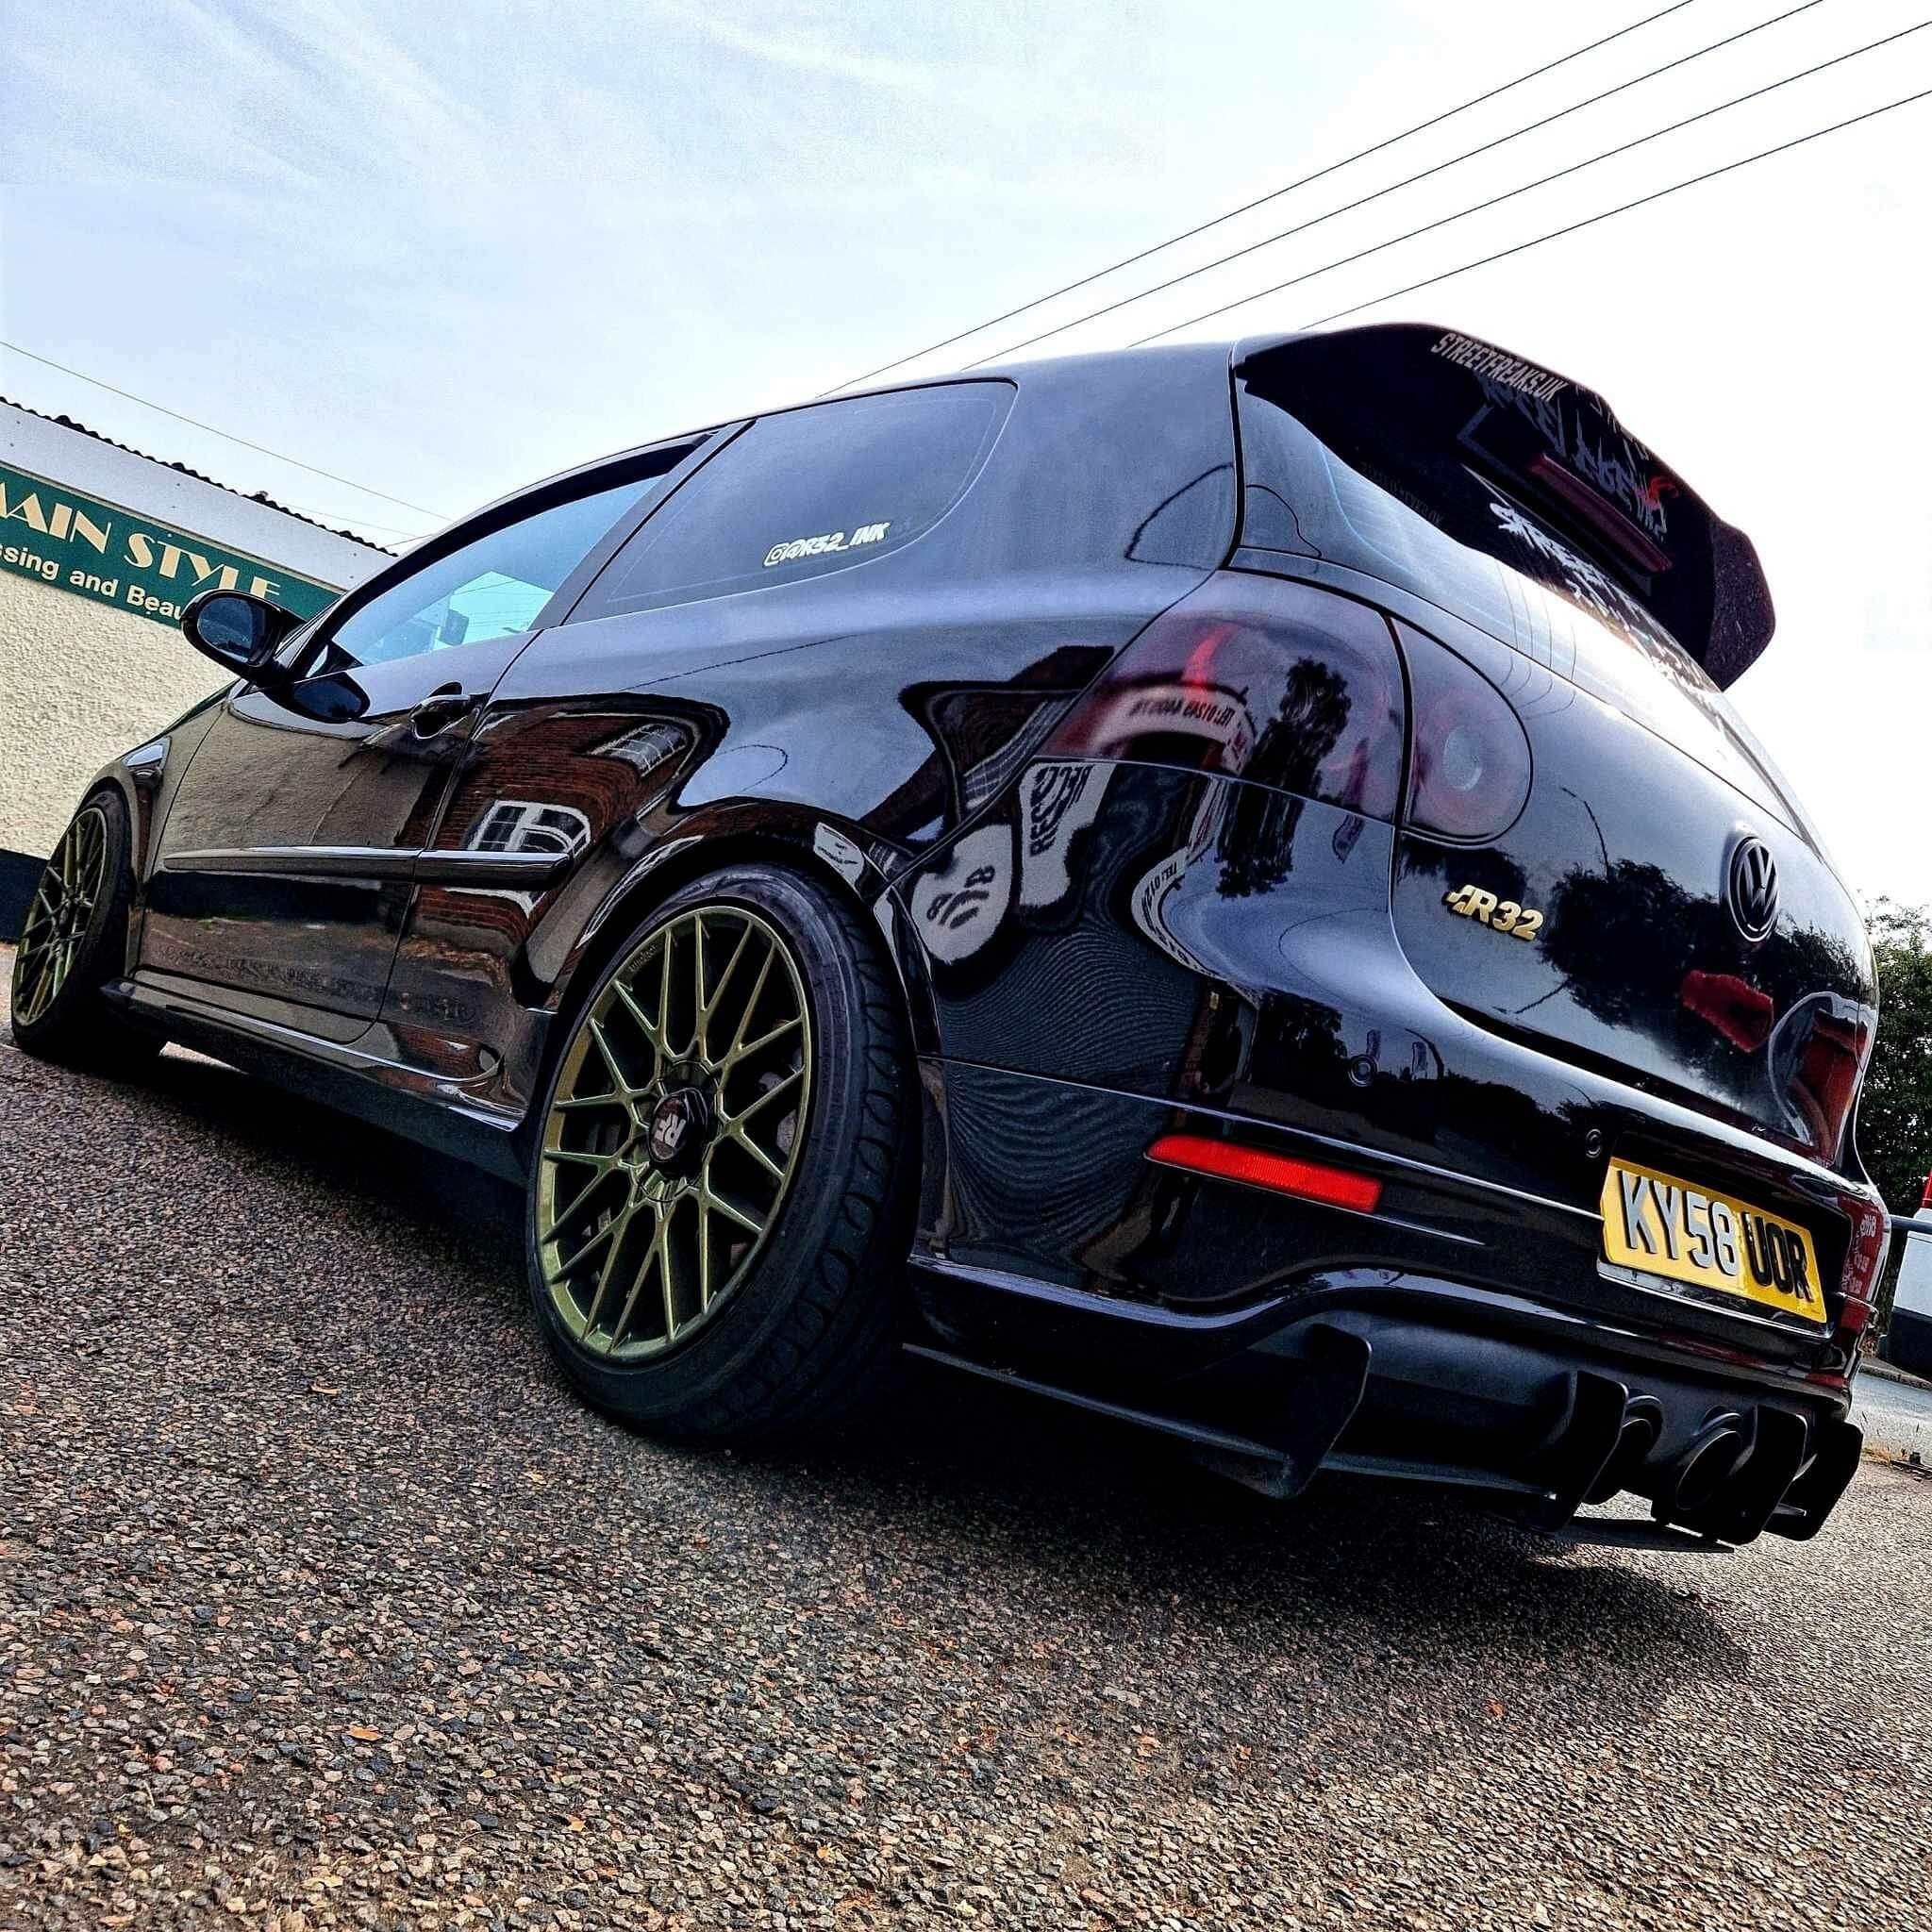 We got London in da house. Mk5 R32 by @r32_ink rocking our signature 🦆 ducktail spoiler! Clearly UK guys knows what&rsquo;s up with VW game. &mdash;&mdash;&mdash;&mdash;&mdash;&mdash;&mdash;&mdash;&mdash;
.
.
.SHOP ▶️ WWW.SPLITTERGANG.COM
. 
.
. 
. 